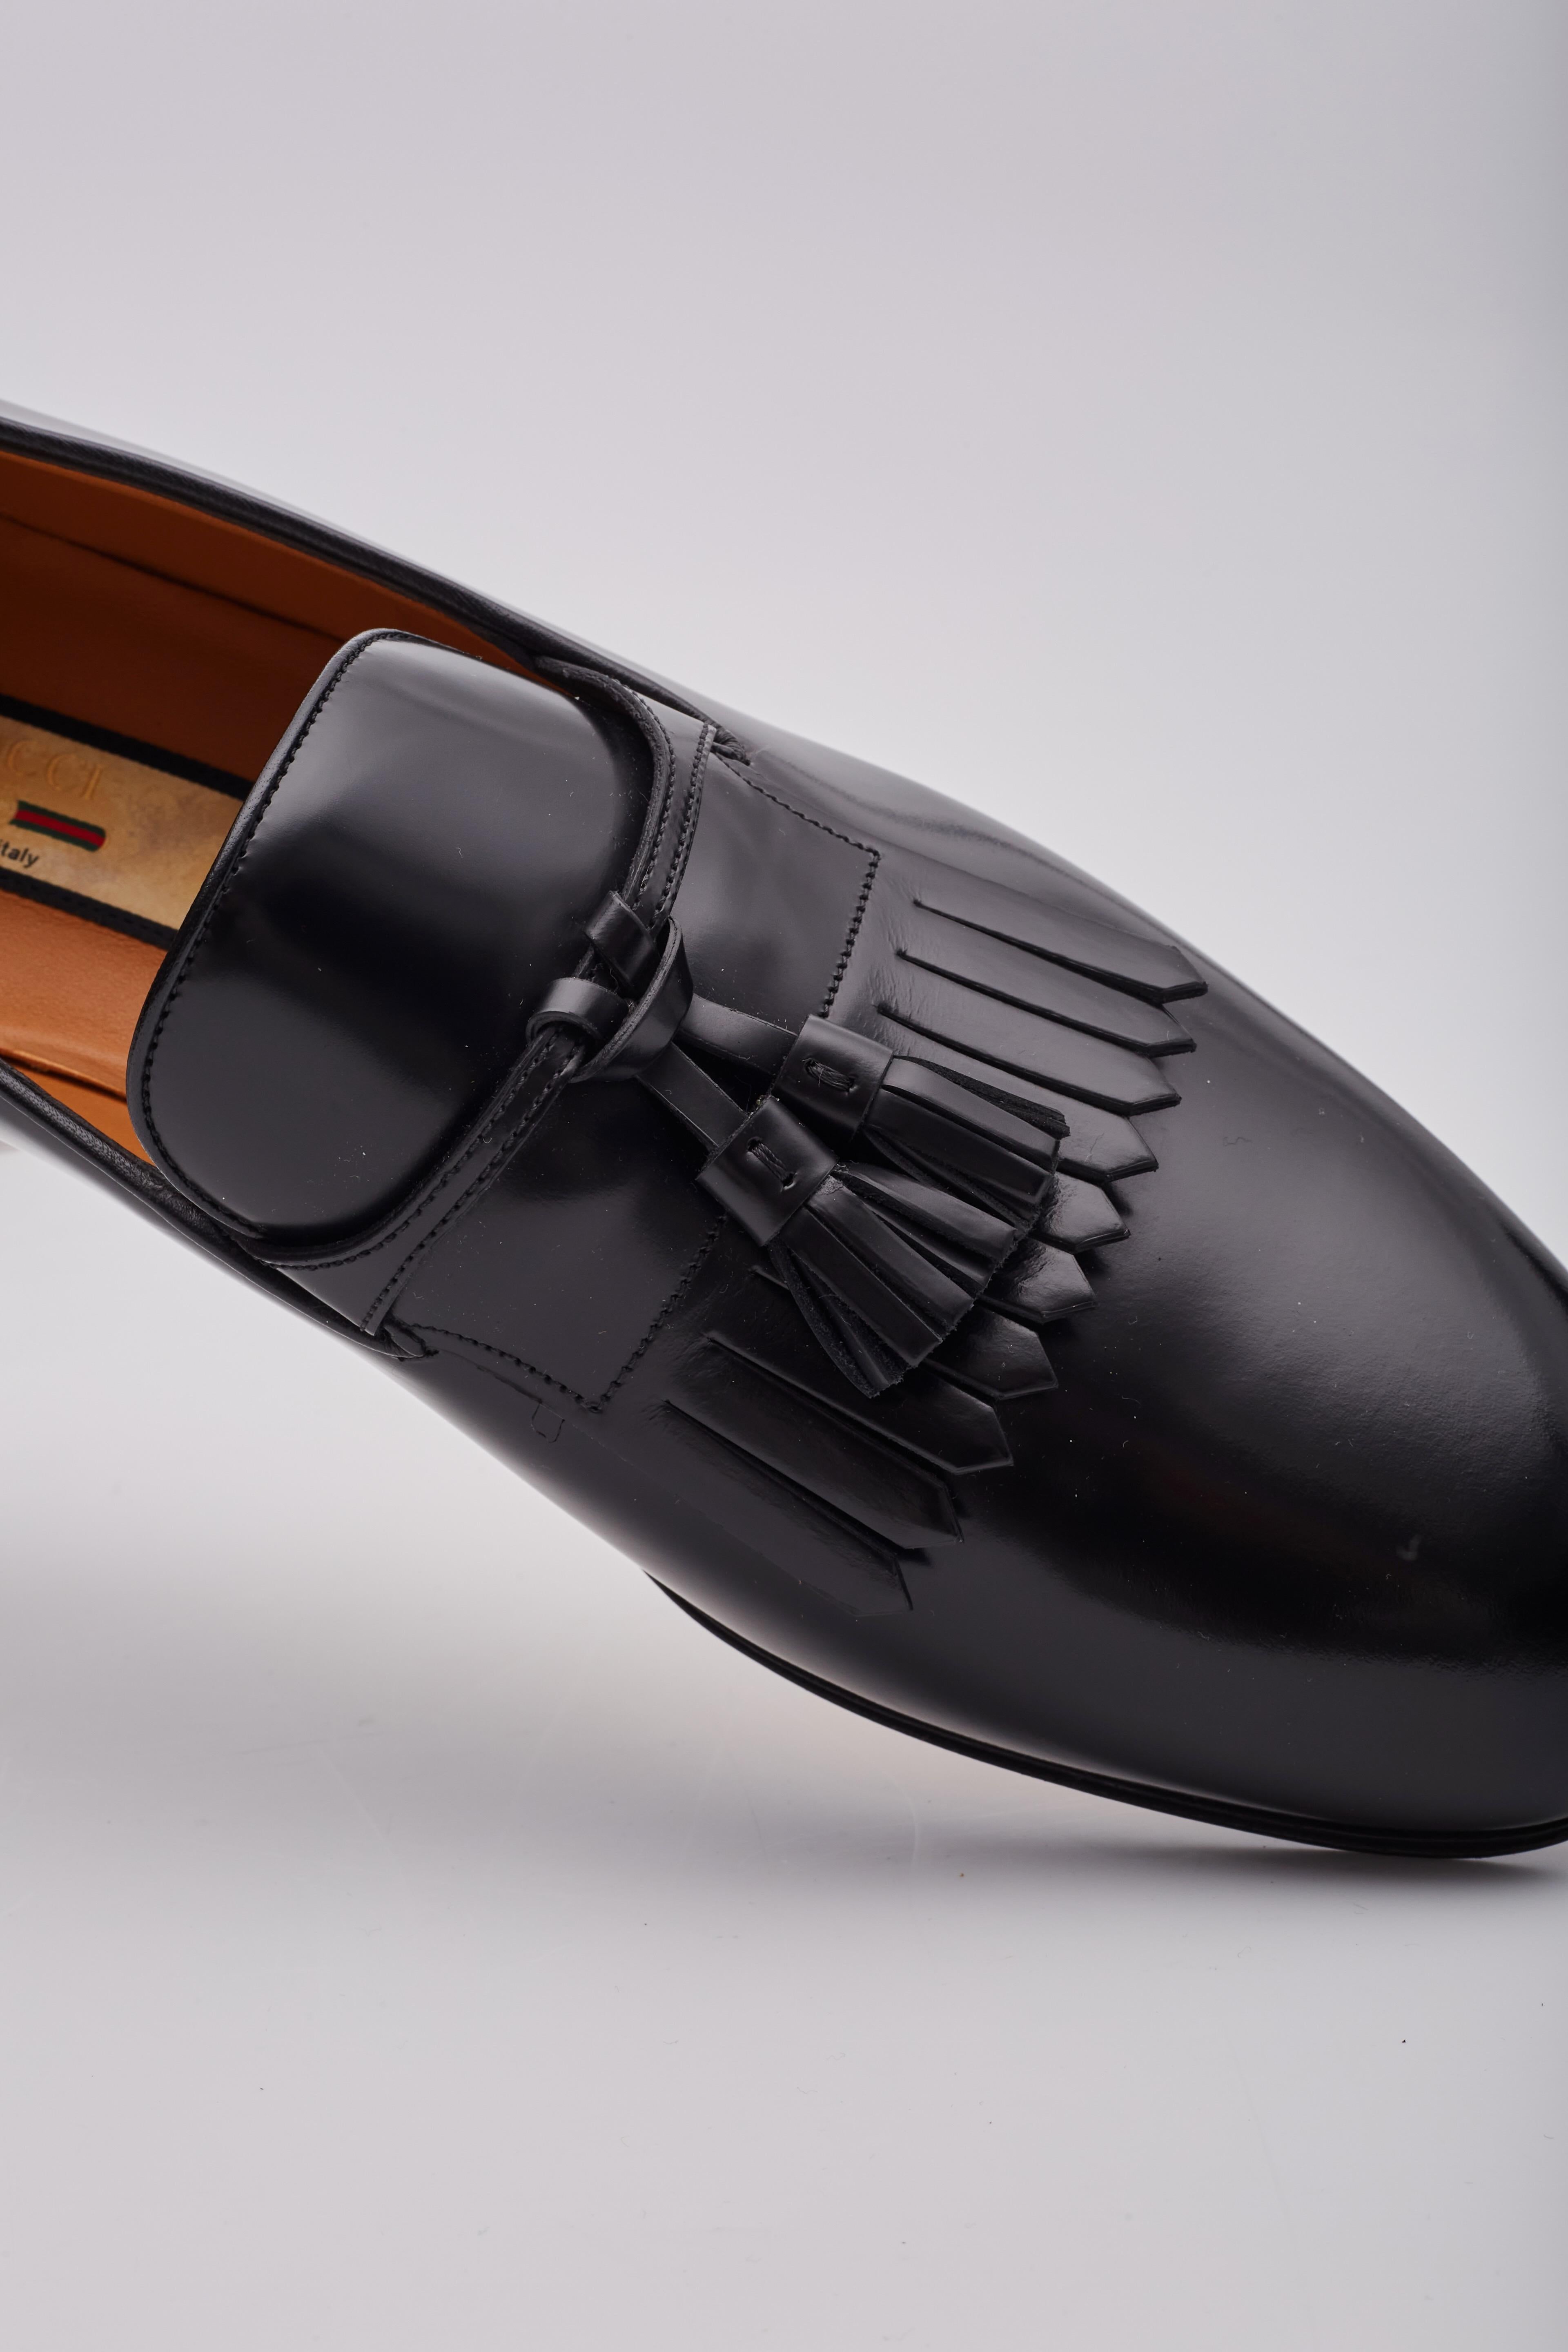 Gucci Leather Black Tassel Loafers Mens (US 9) For Sale 2